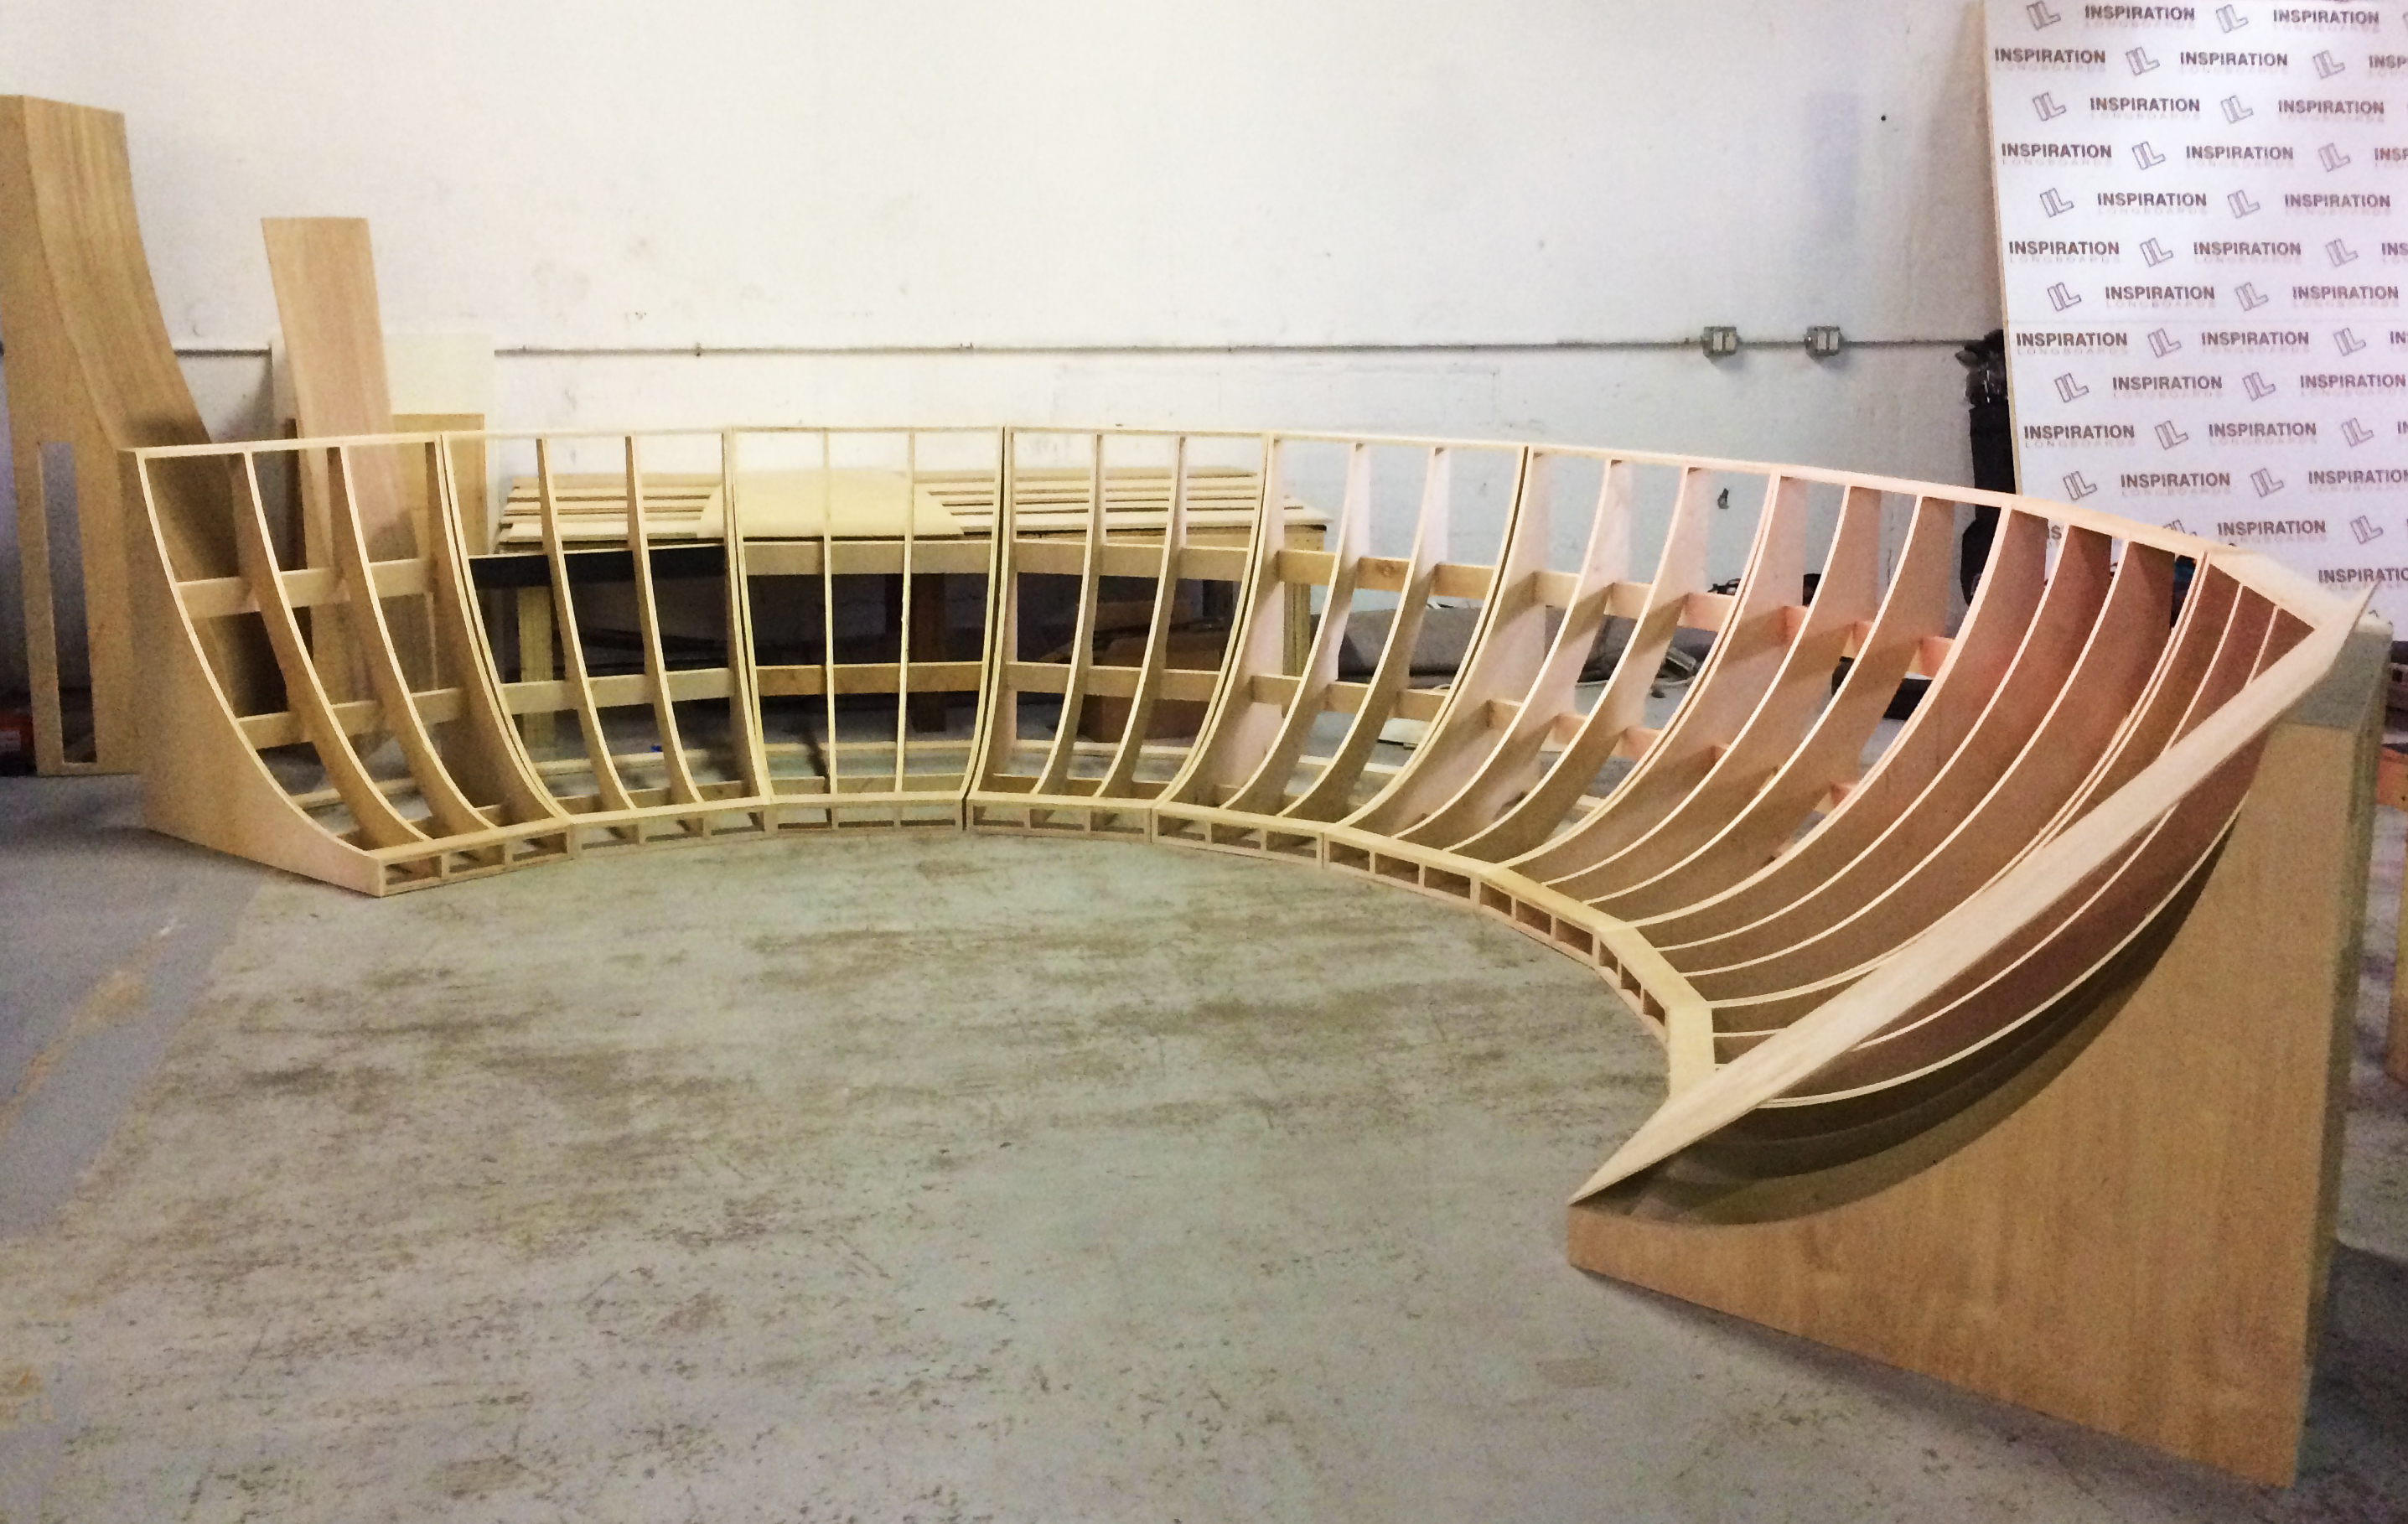 wooden frame for a skate pump track before assembly.